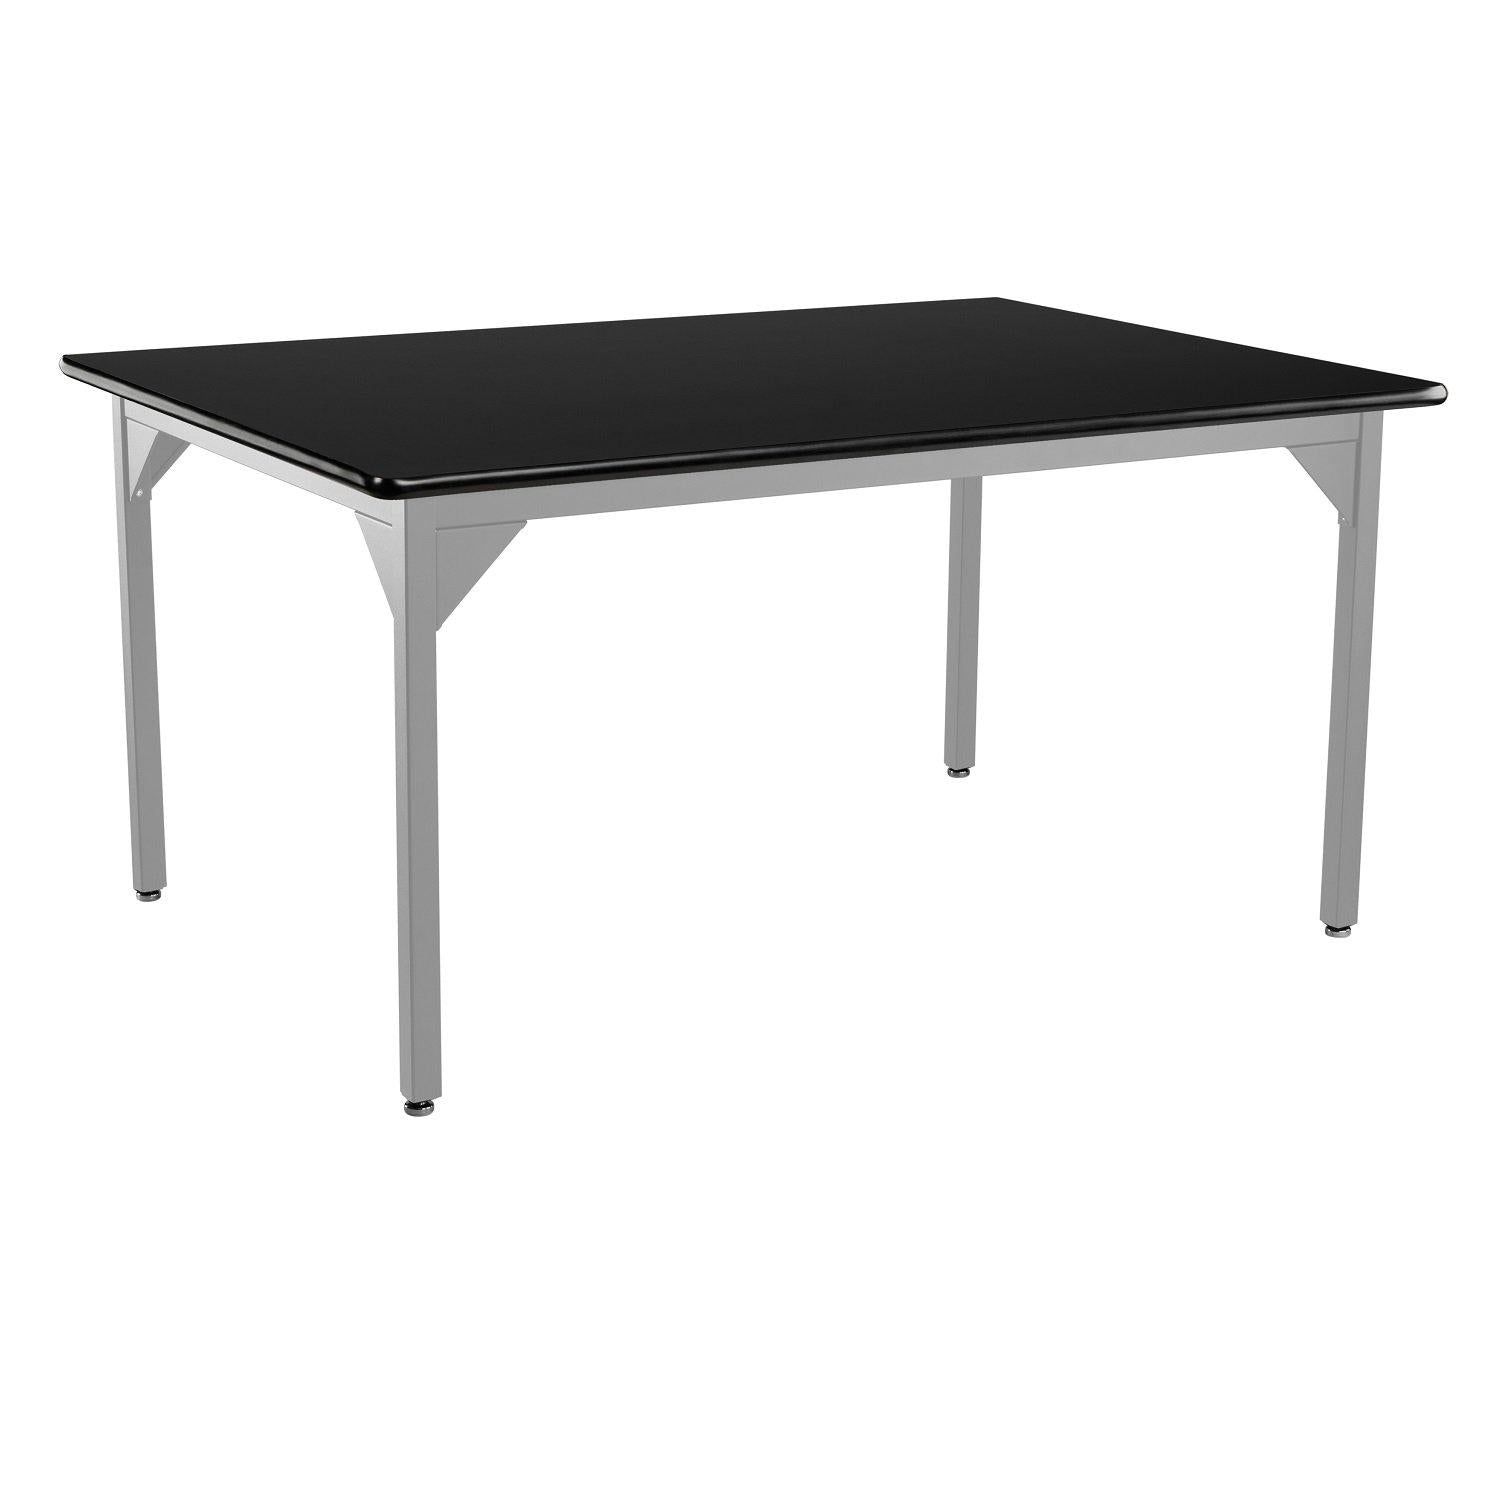 Heavy-Duty Fixed Height Utility Table, Soft Grey Frame, 48" x 48", High-Pressure Laminate Top with T-Mold Edge